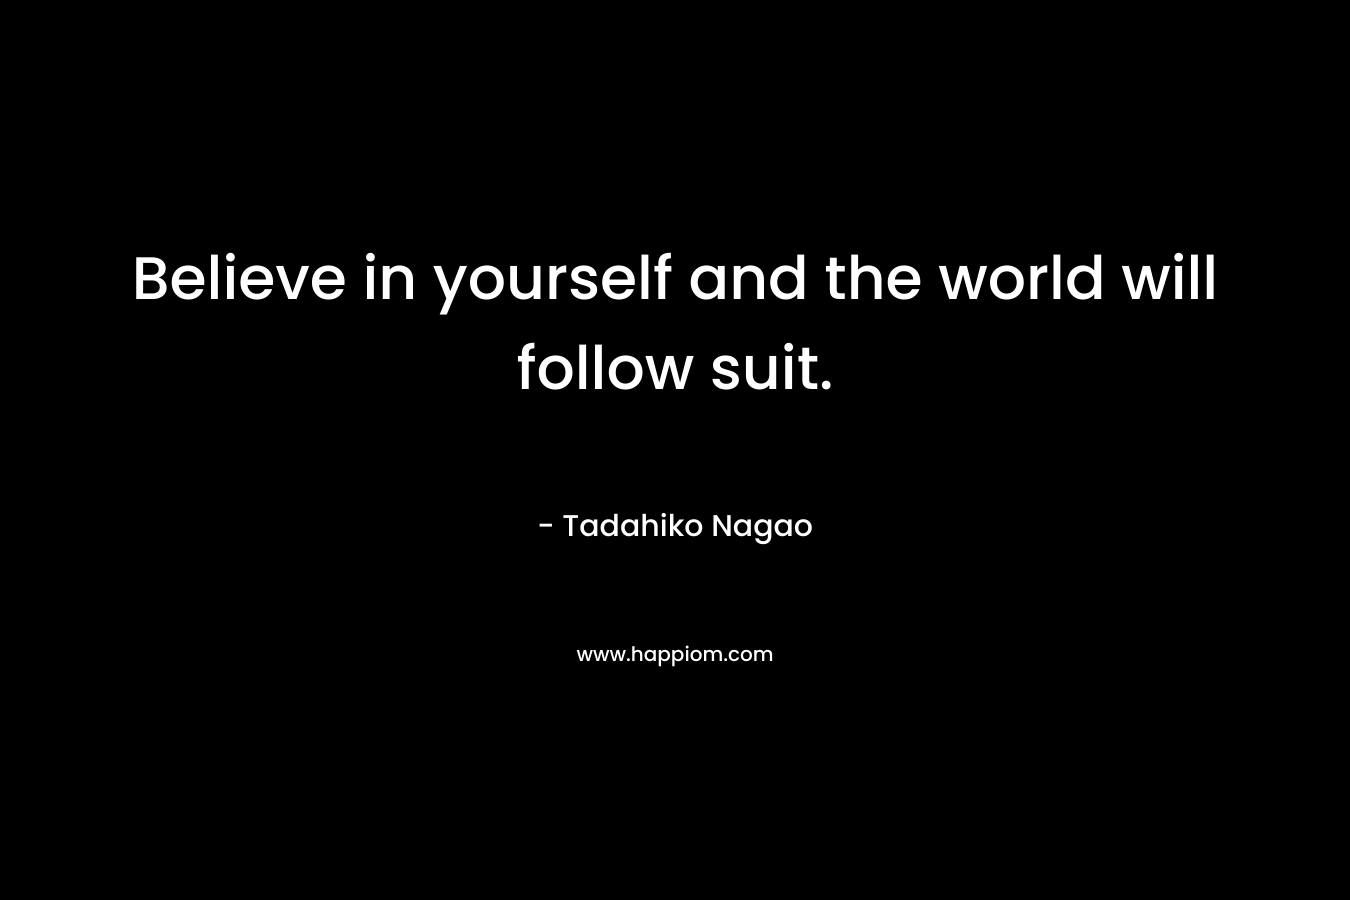 Believe in yourself and the world will follow suit.